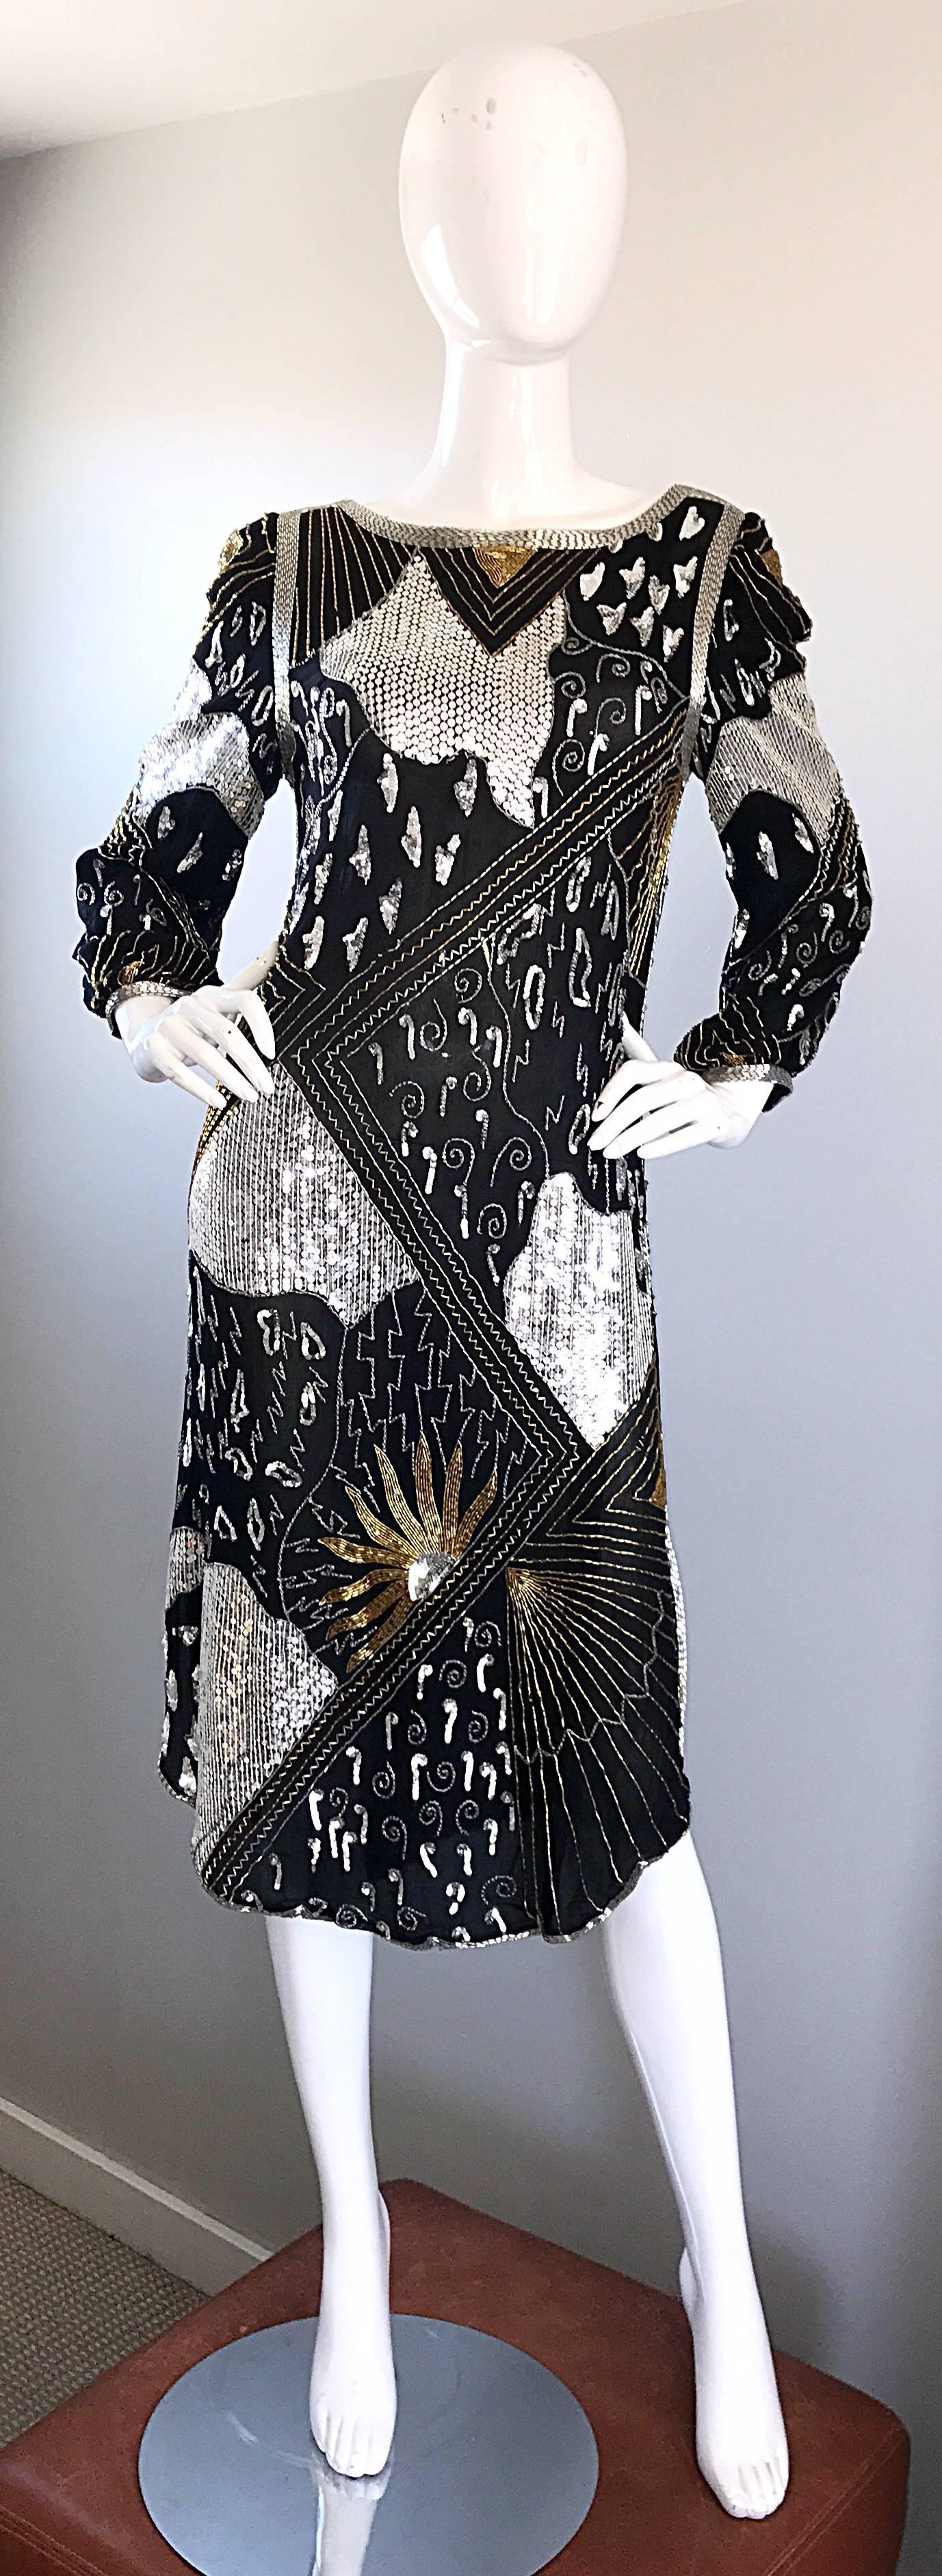 Spectacular vintage JUDITH ANN black silk chiffon long sleeve Gatsby flapper style dress! Features thousands of hand-sewn silver and gold sequins and beads throughout. Beaded sleeve cuffs feature hidden snaps. Side vent at each side of the leg.